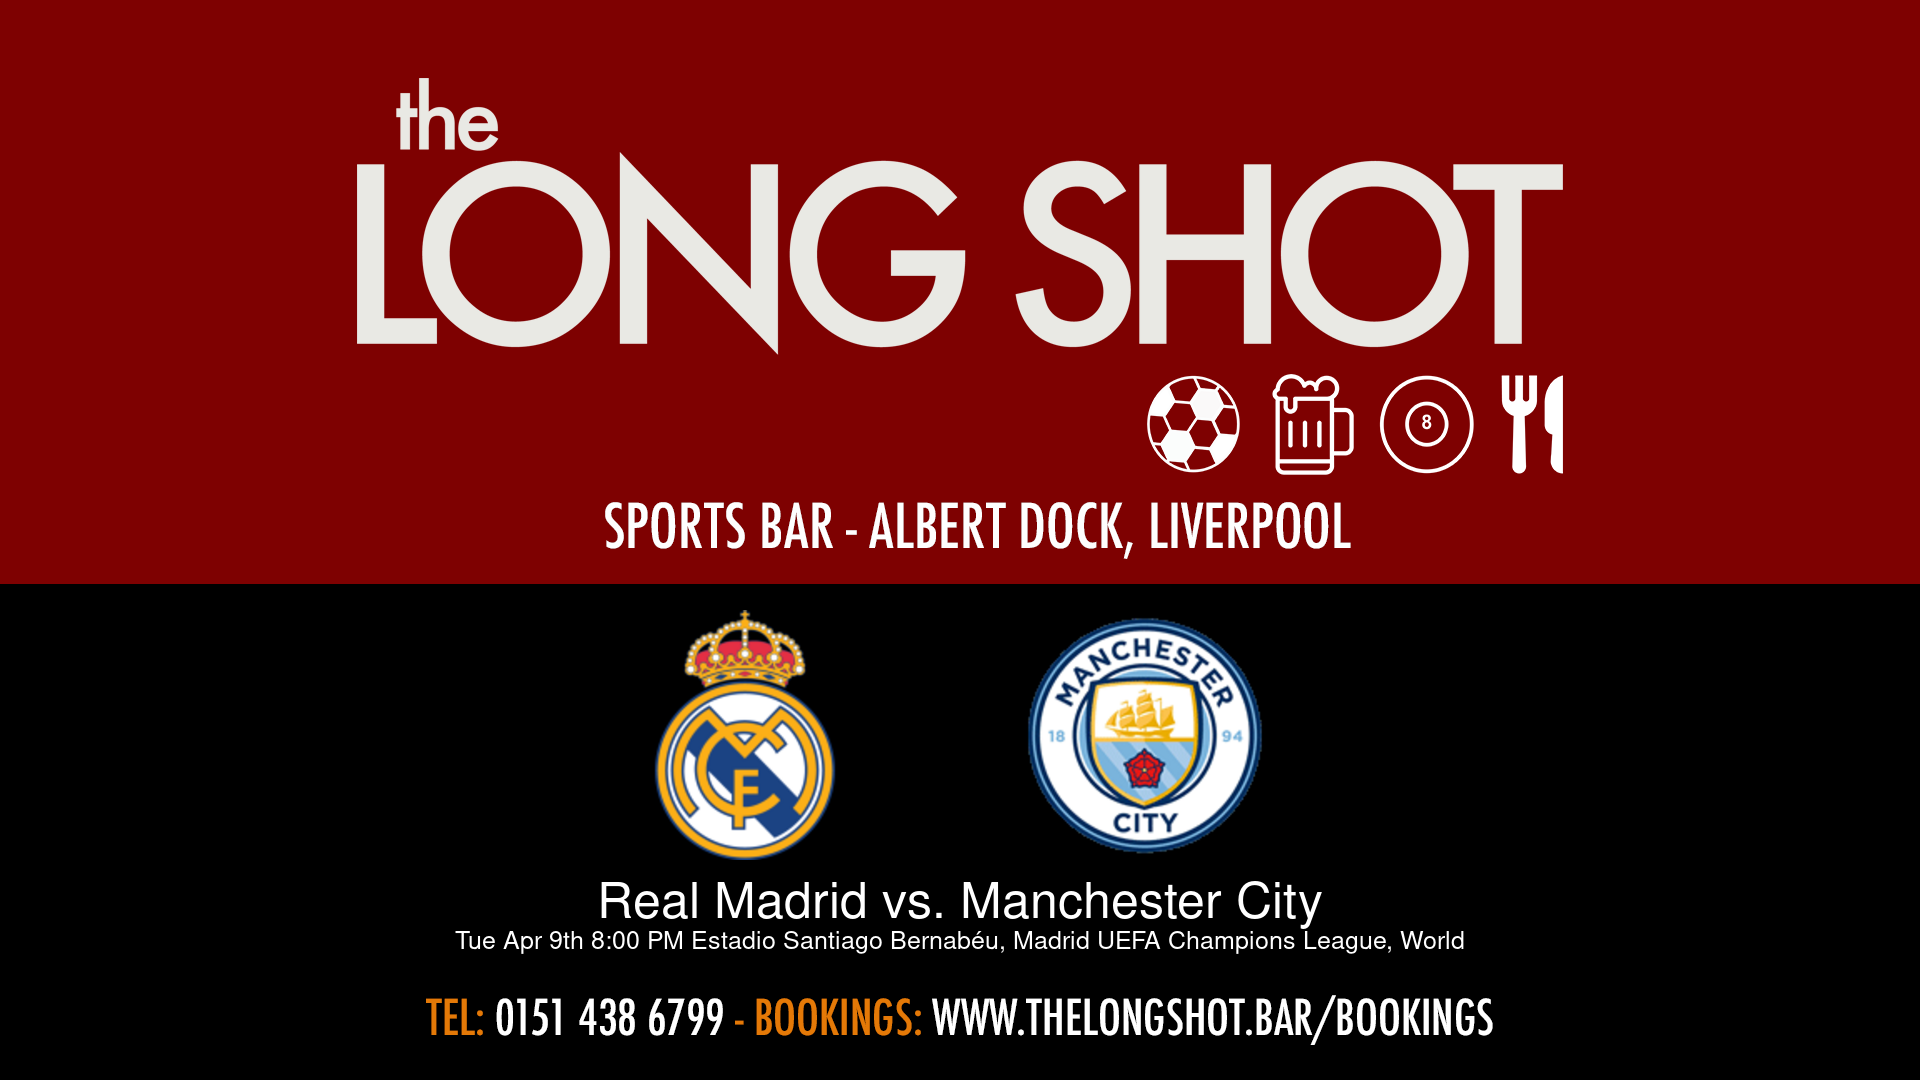 Event image - Real Madrid vs. Manchester City